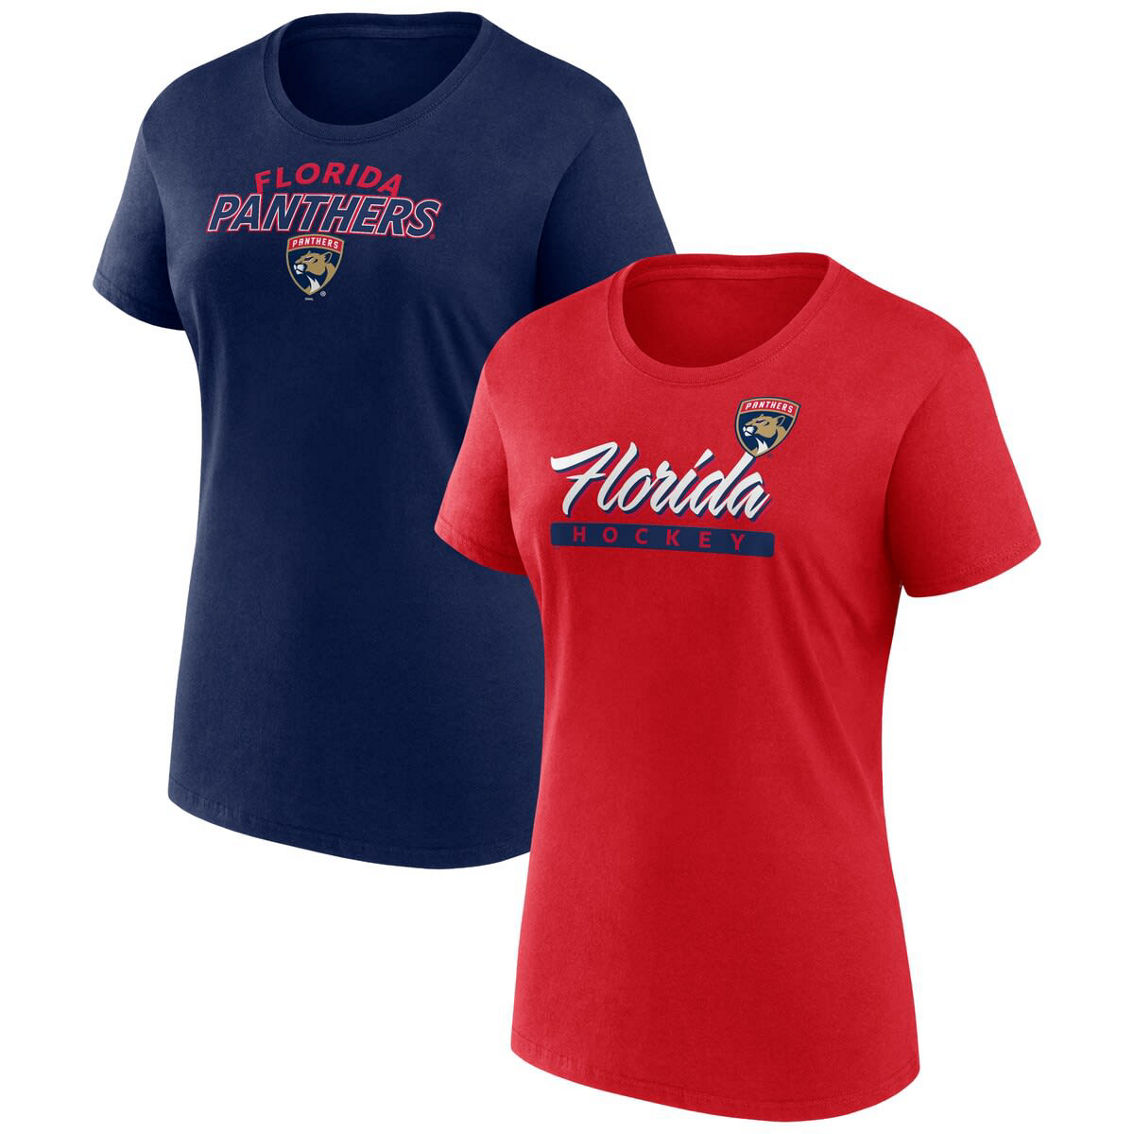 Fanatics Branded Women's Florida Panthers Risk T-Shirt Combo Pack - Image 2 of 4